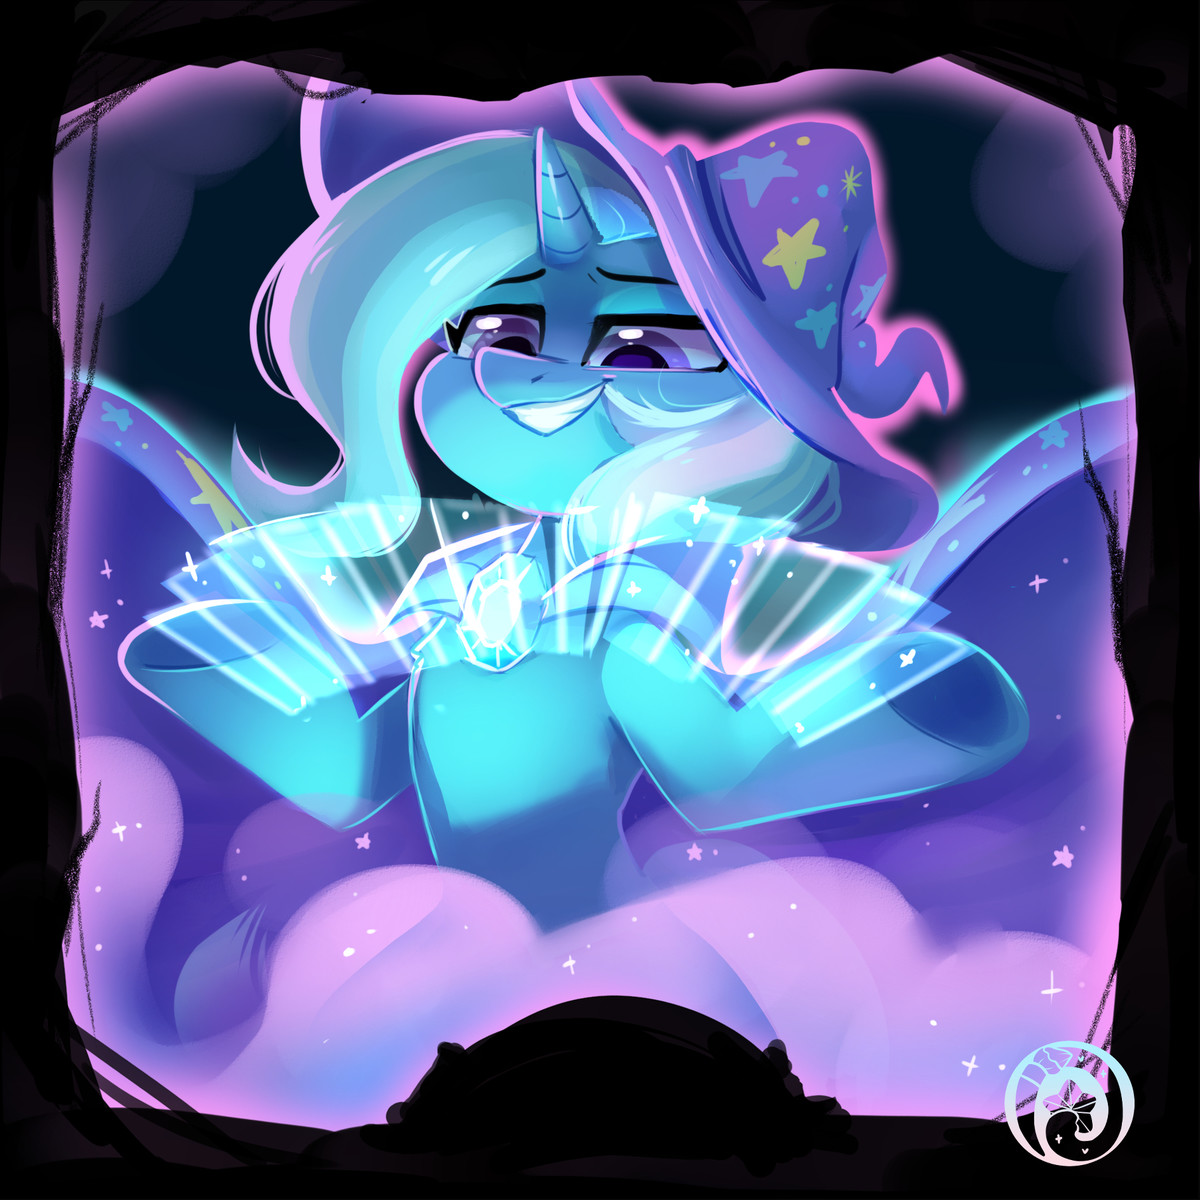 Bonus Art Comp #3 - G&P Trixie. Hey everyone! If you've been following my compilations you'll know that I'm a fan of the ponies, but thought it was about time I